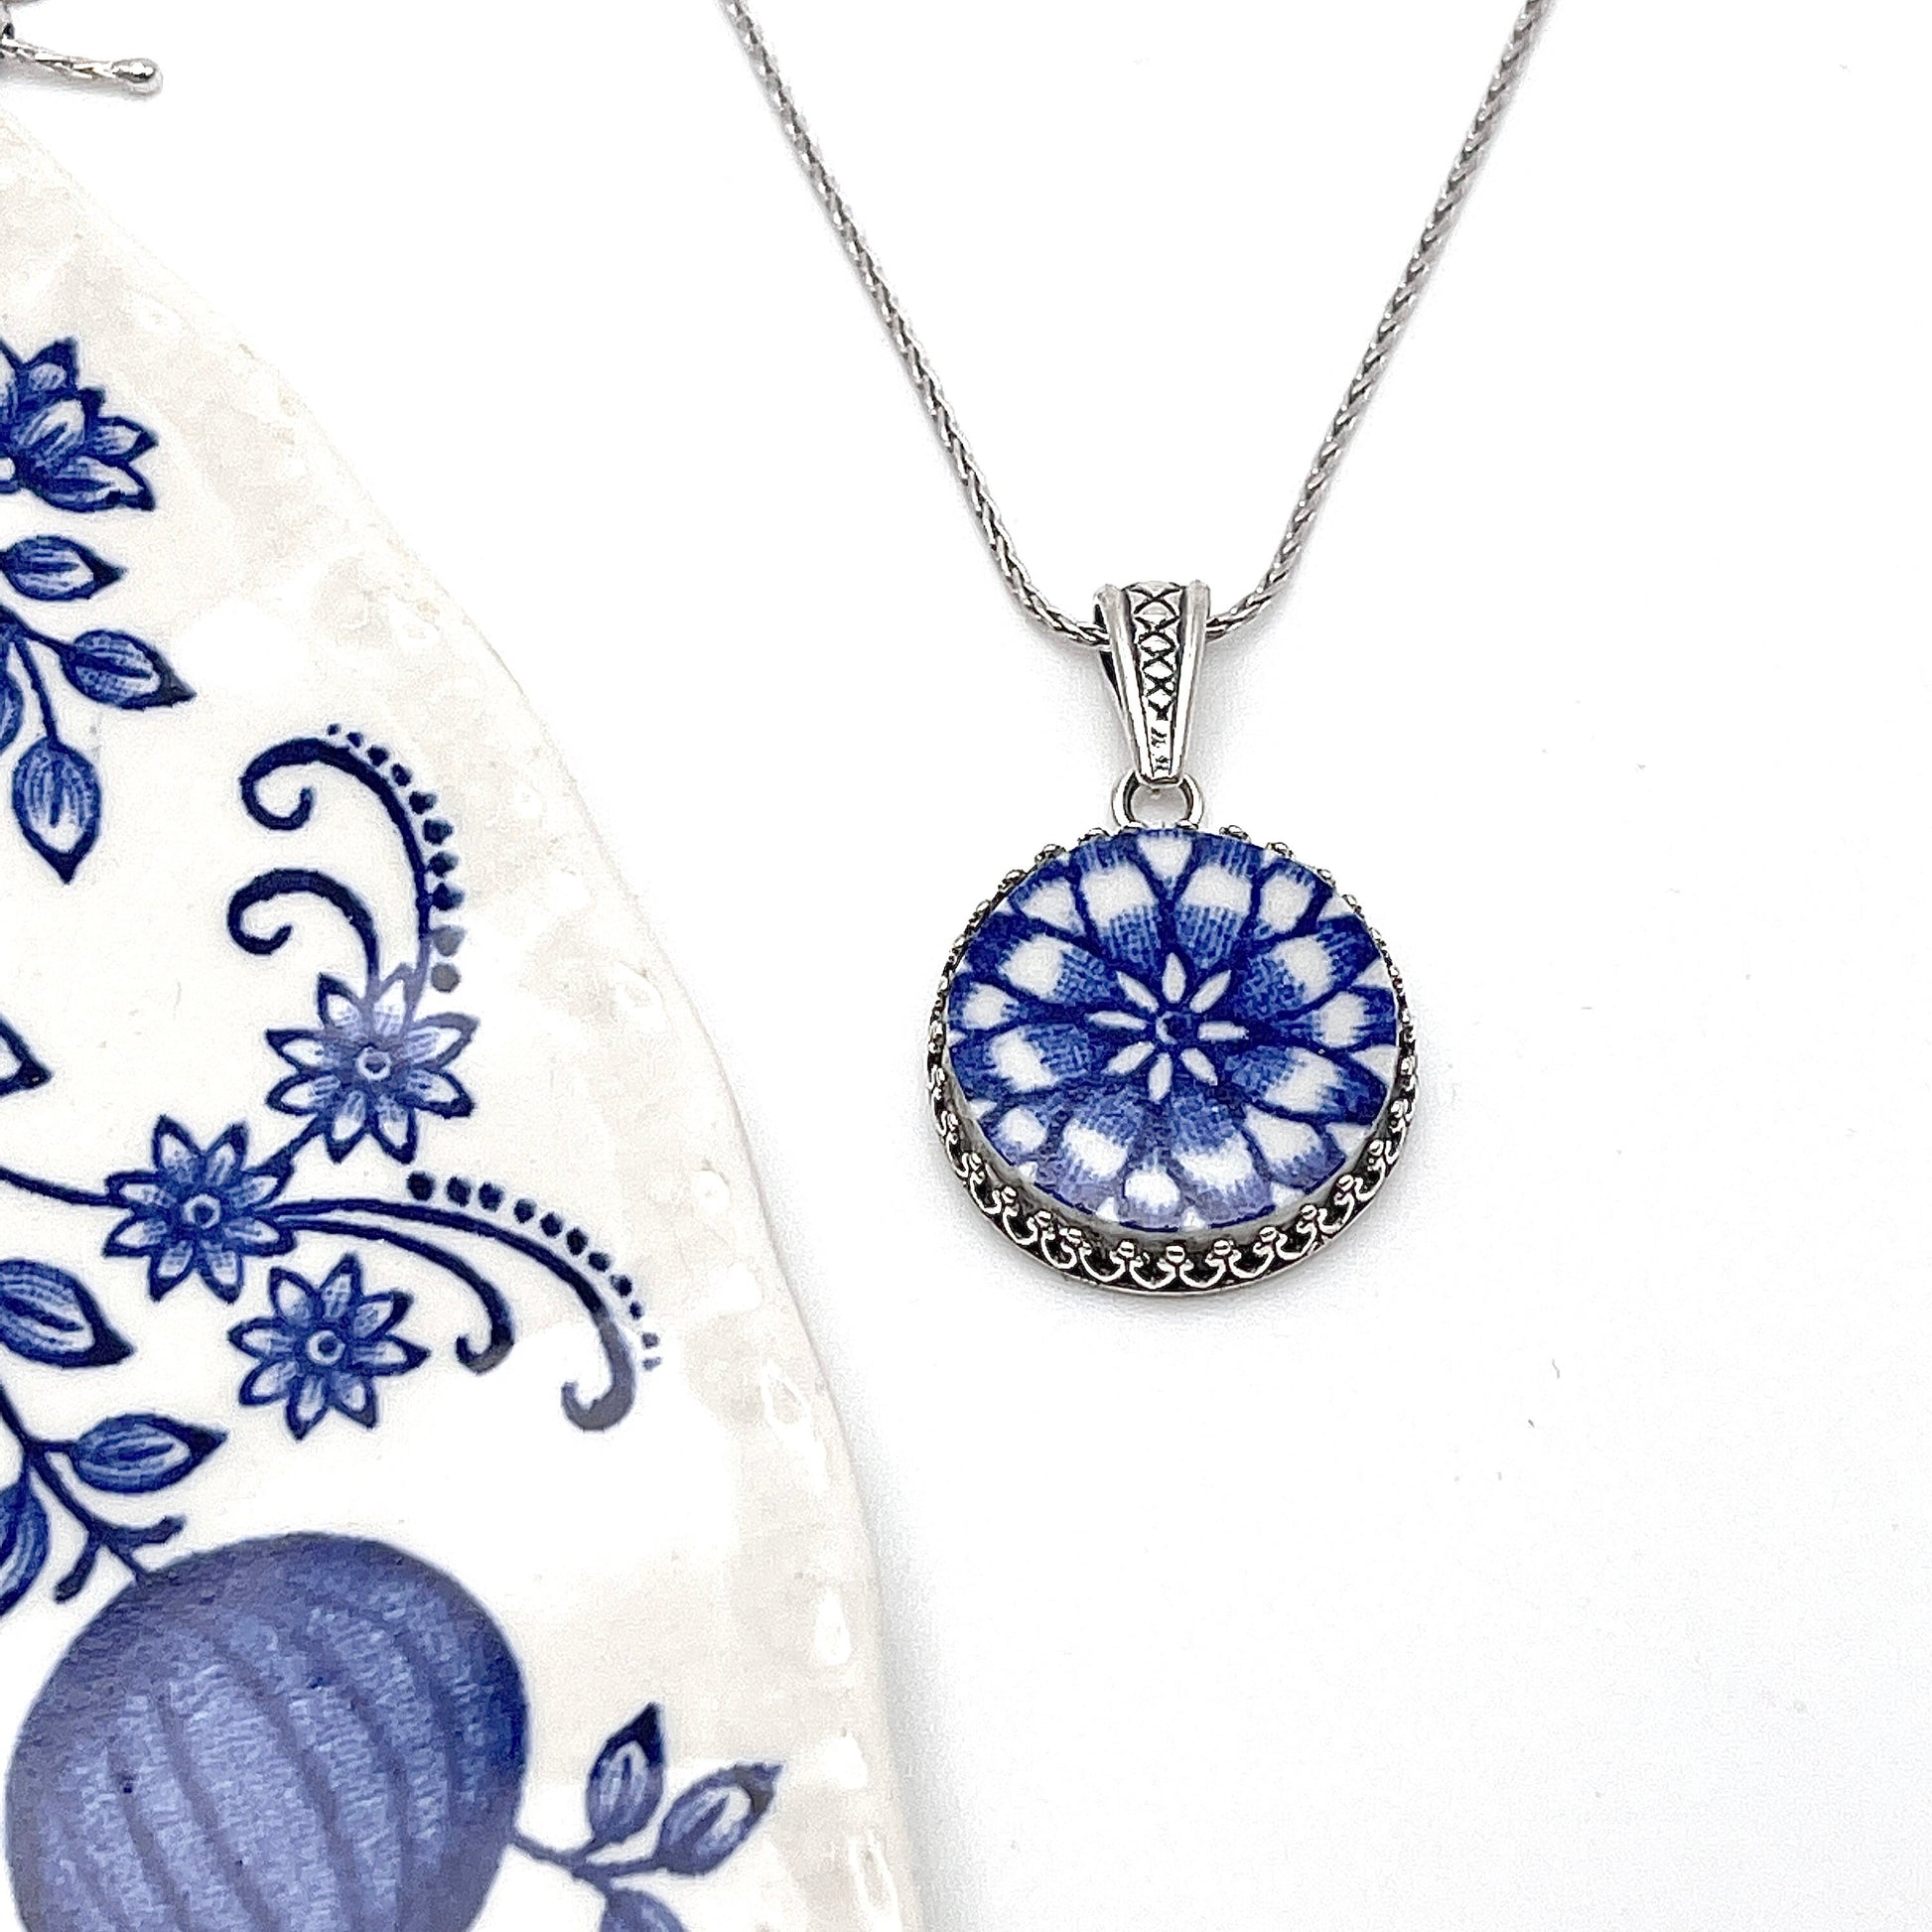 Adjustable Blue Onion Vintage China Necklace, Sterling Silver Broken China Jewelry, Unique Gifts for Women